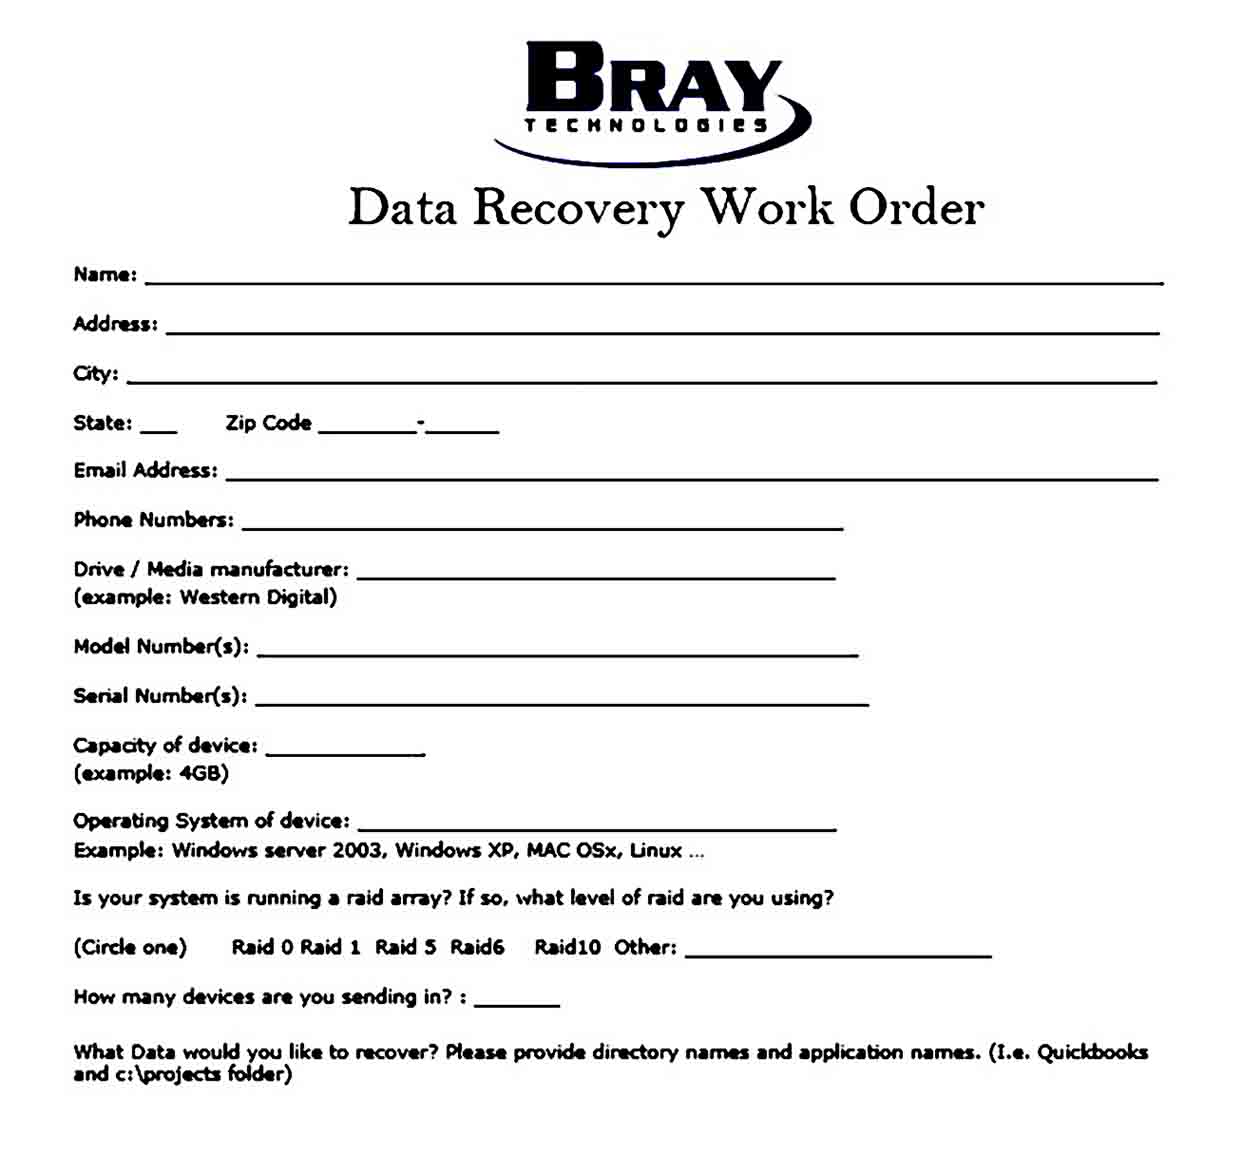 Data Recovery Work Order templates